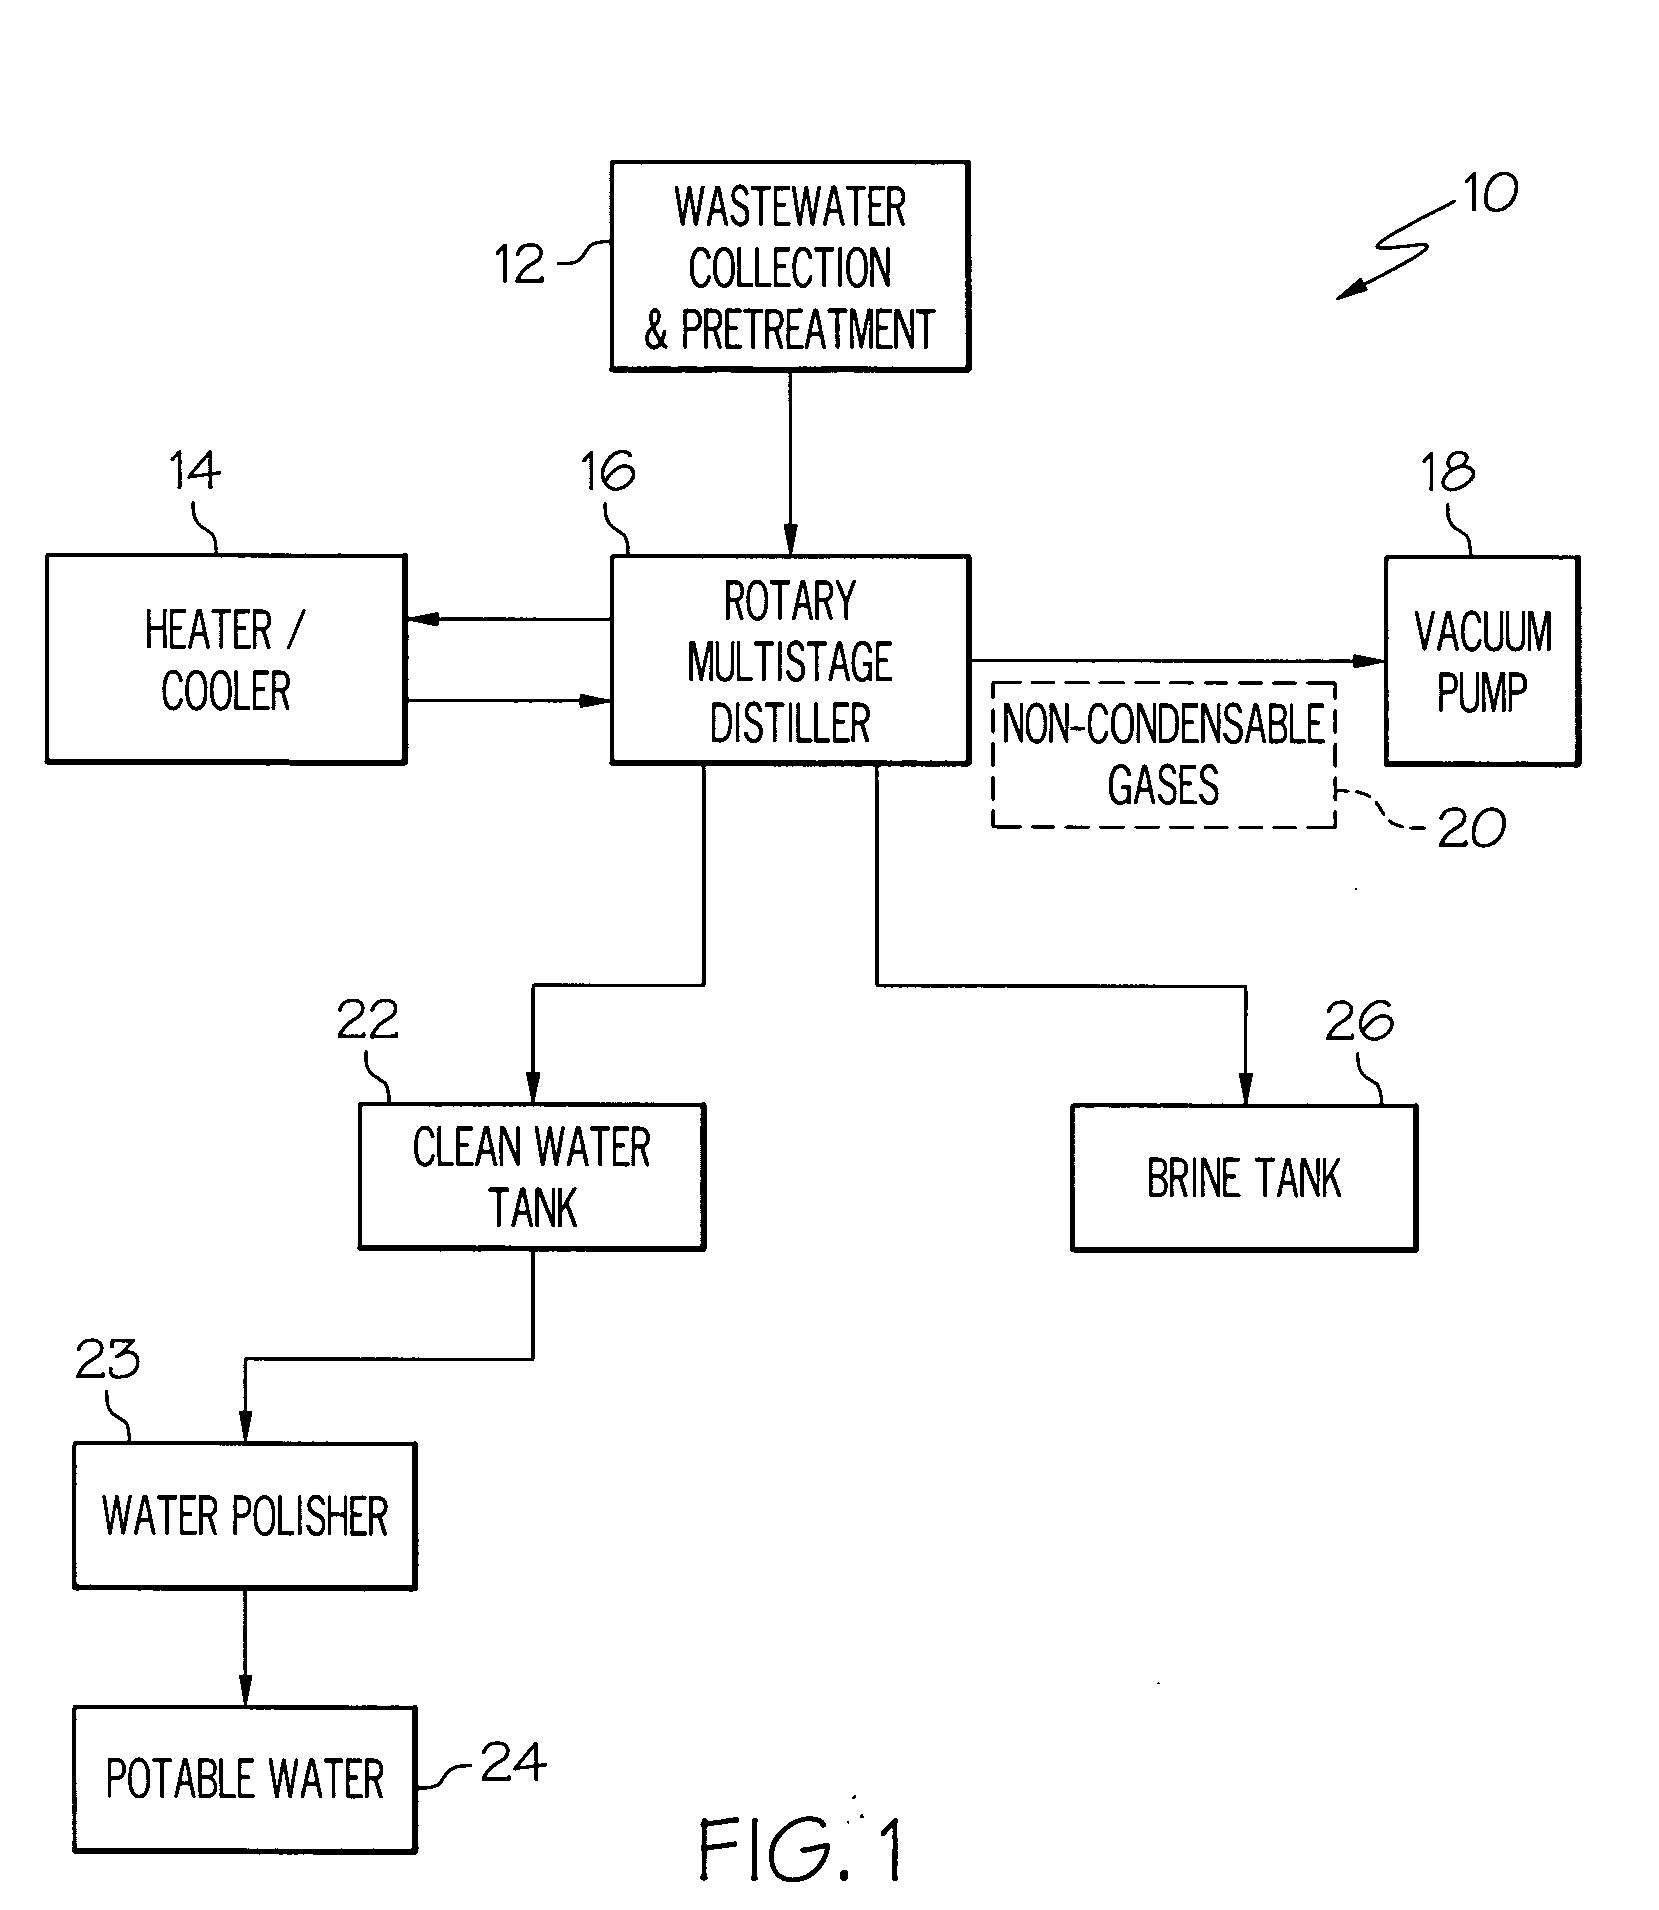 Apparatus and methods for water regeneration from waste